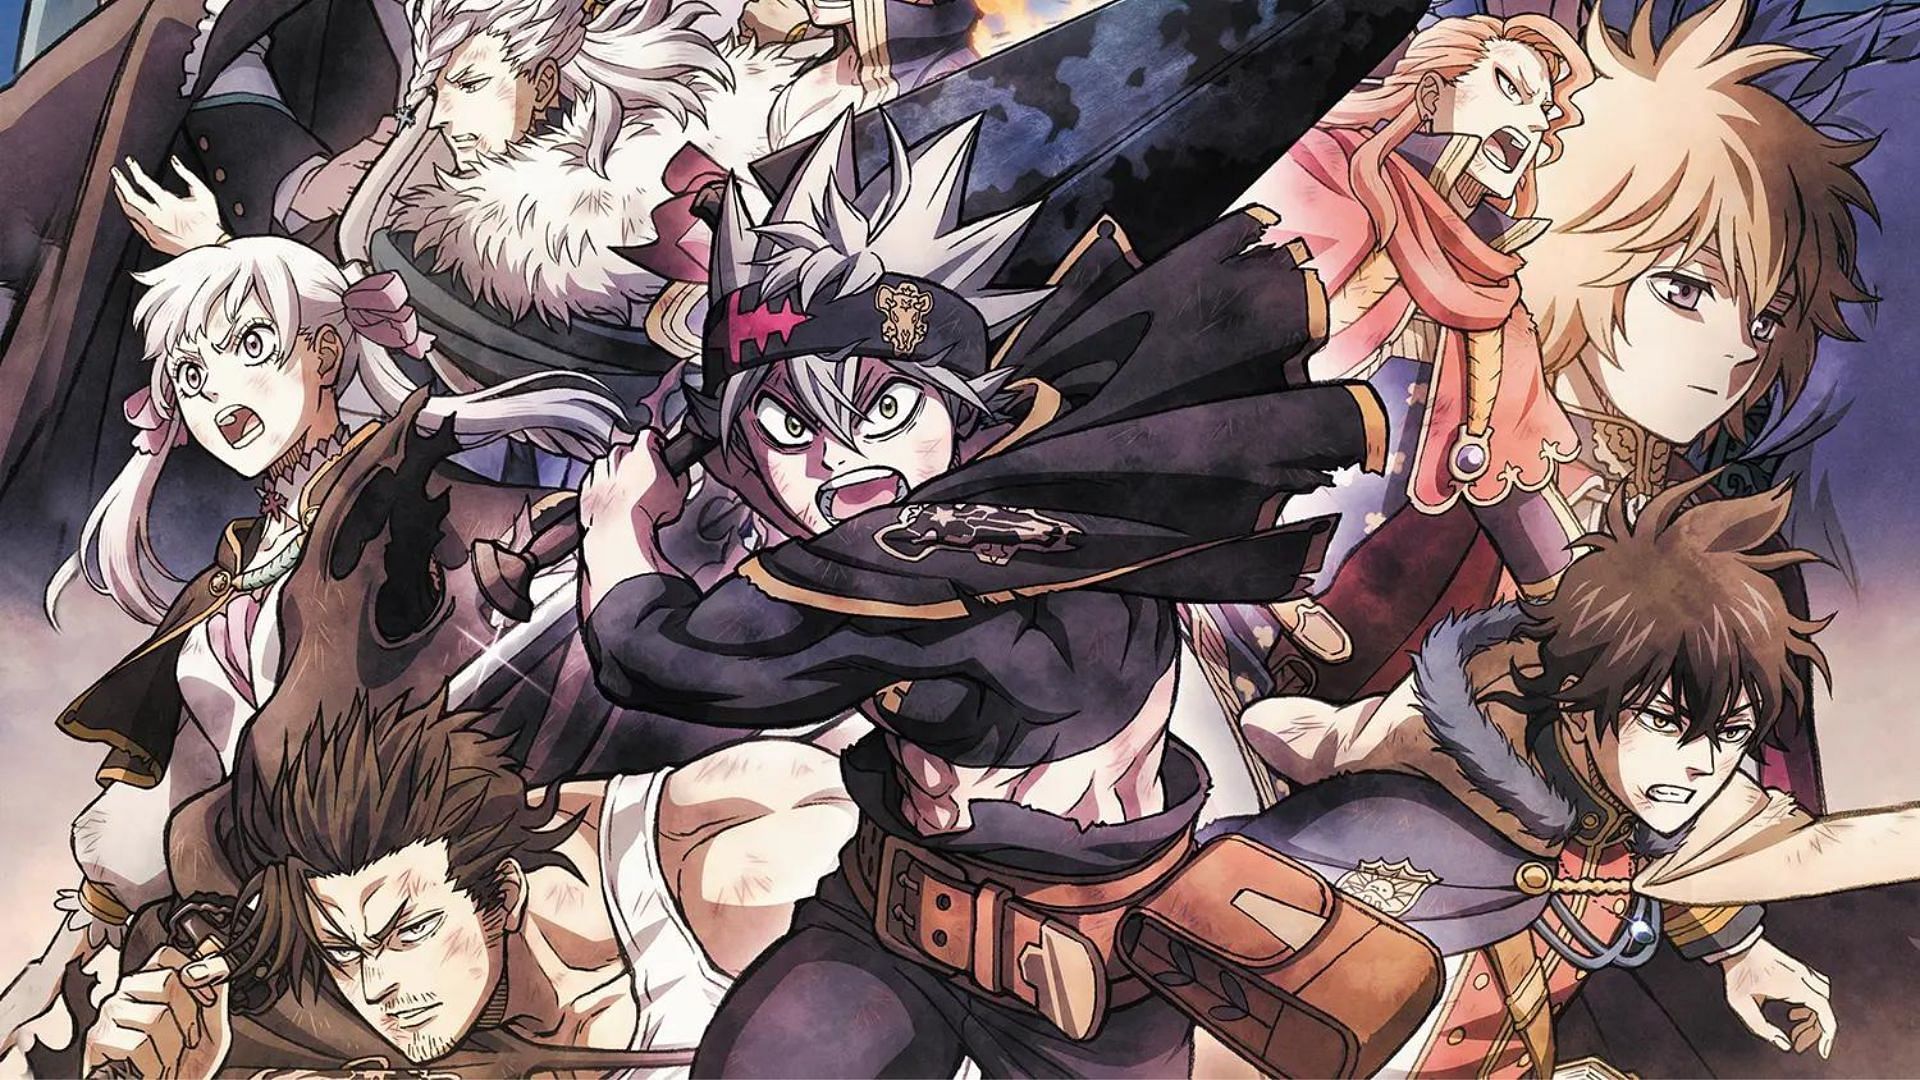 Black Clover surprises fans with new project ahead of movie launch